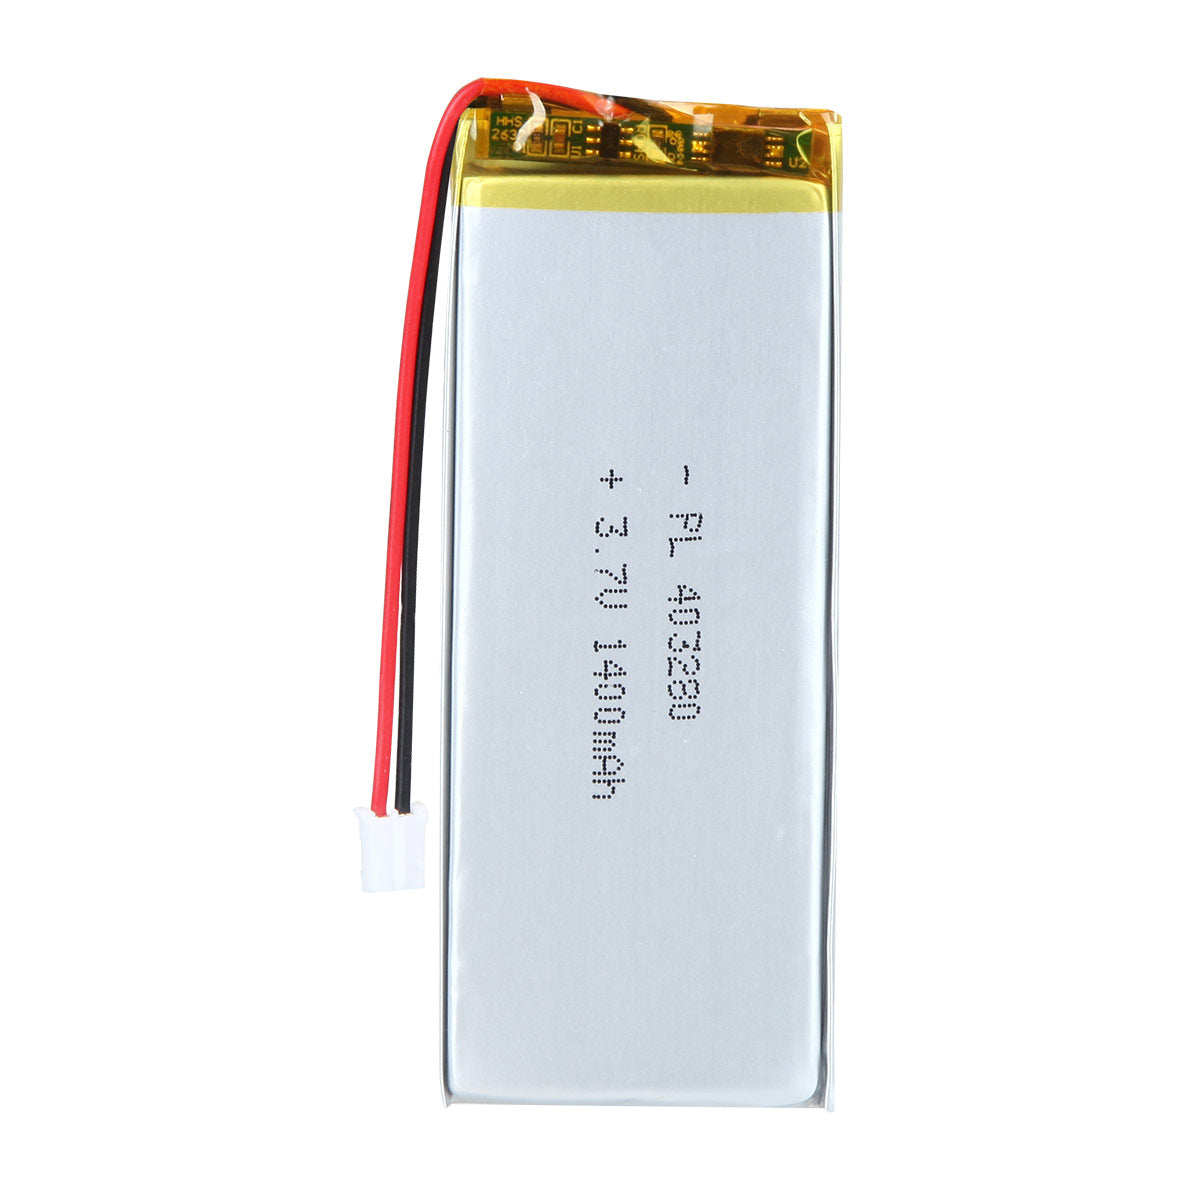 YDL 3.7V 1400mAh 403280 Rechargeable Lipo Battery with JST Connector - YDL Battery